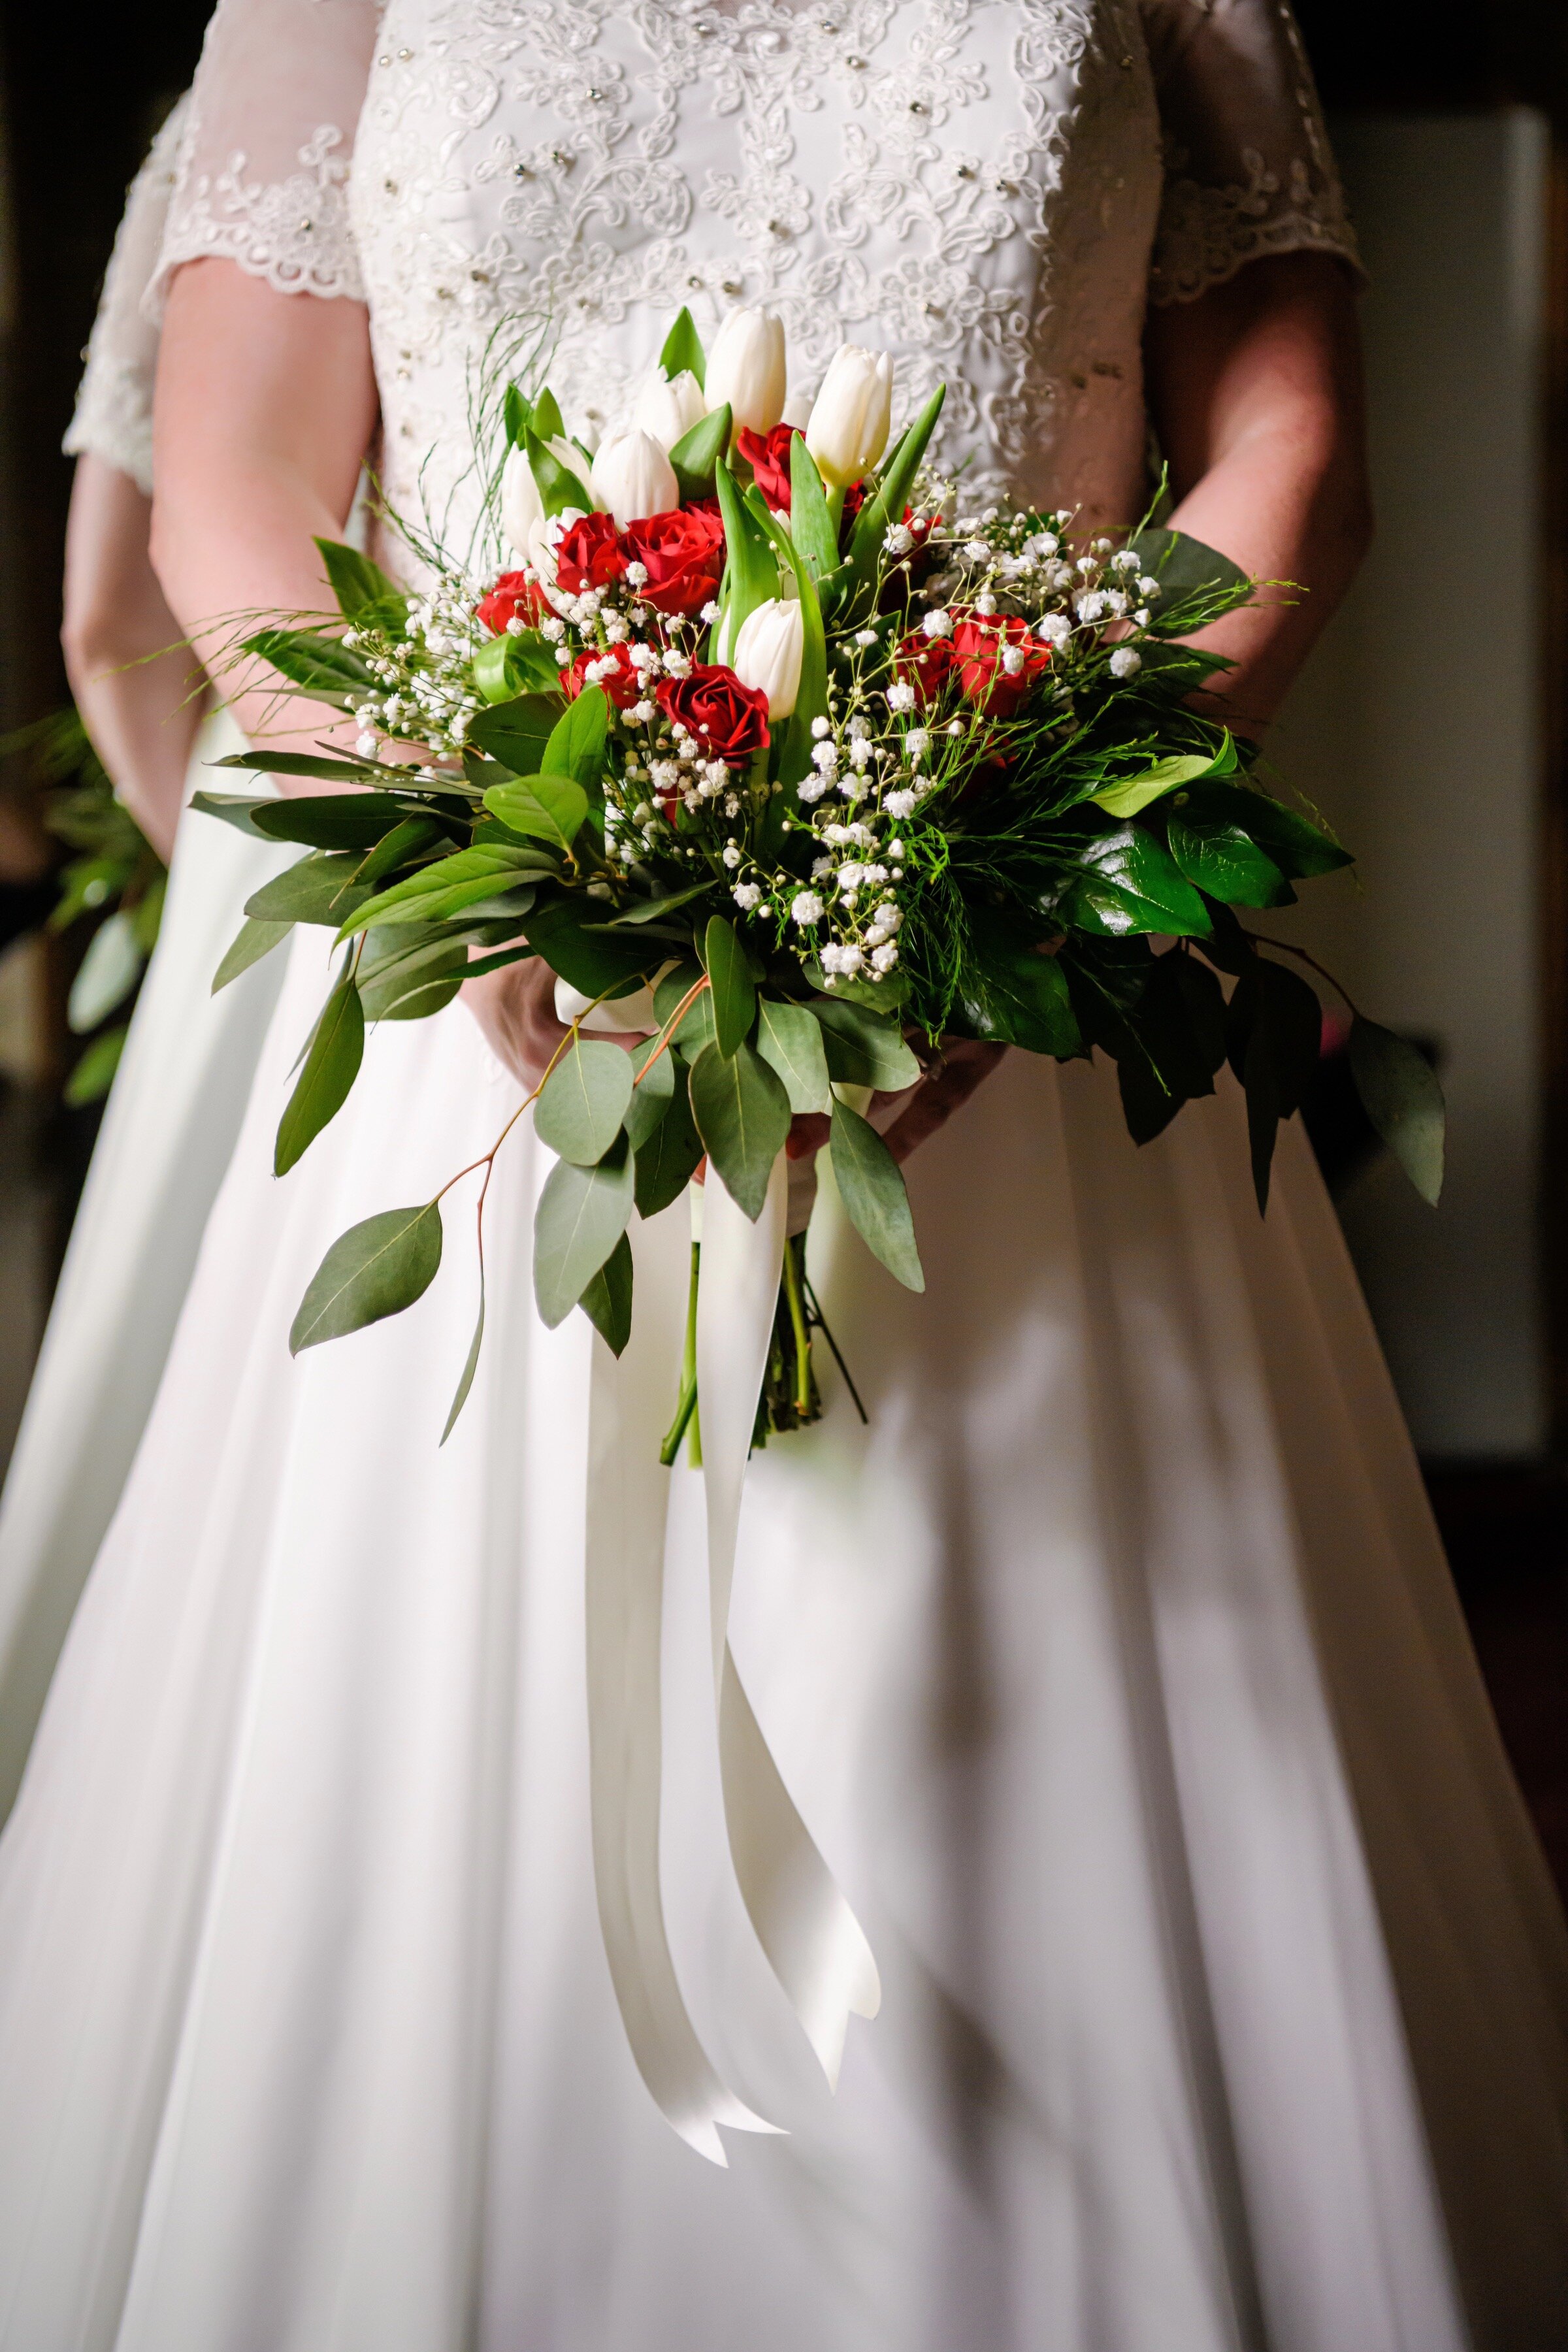 Brides posy bouquet  Ivory Calla lily and red berries Winter Wedding/Xmas Bride 